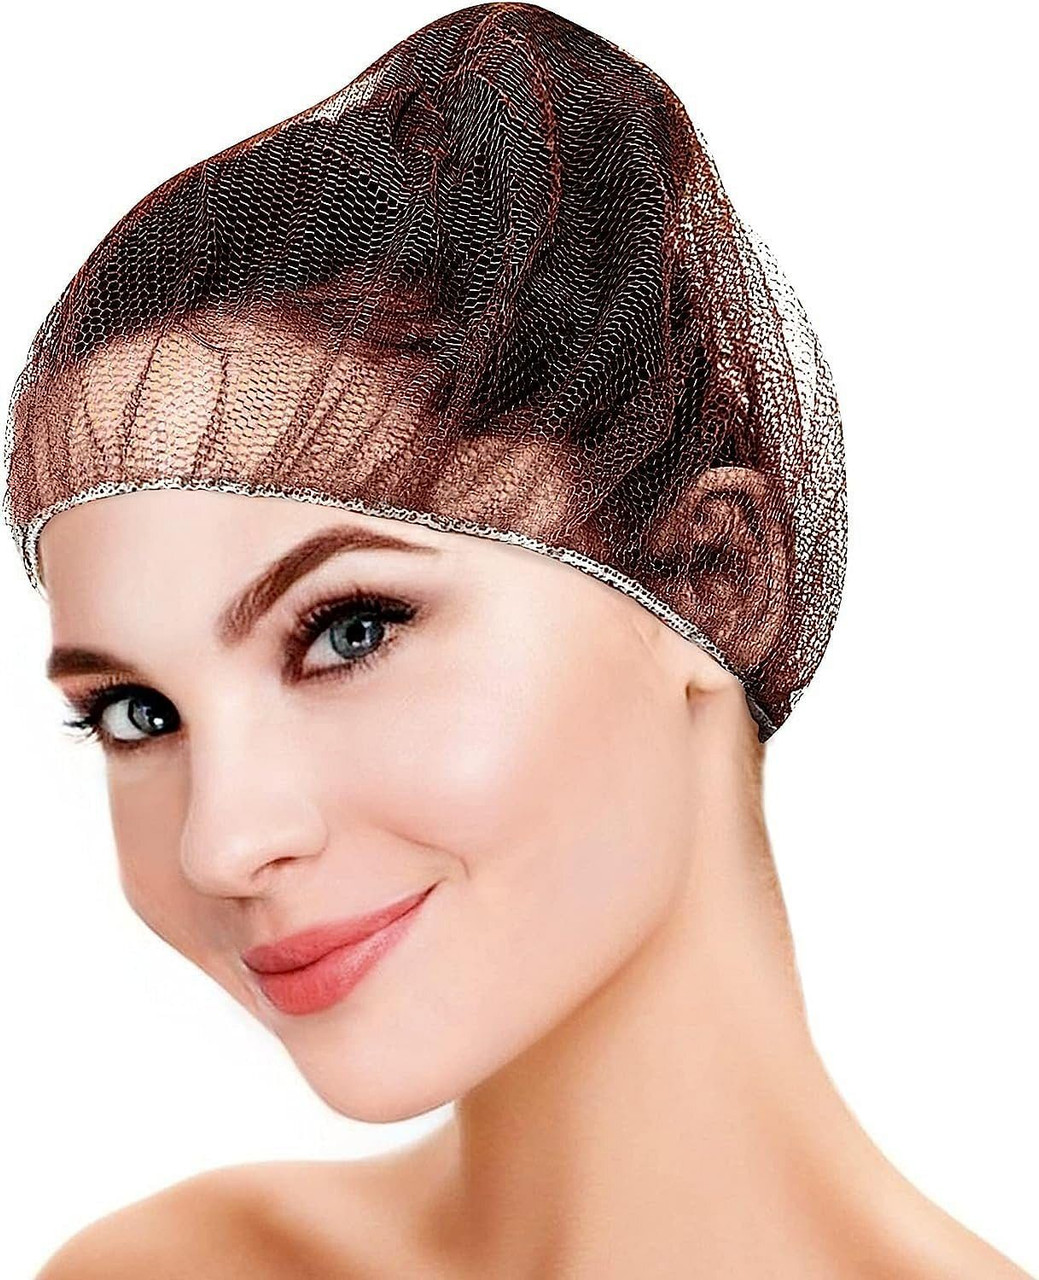 AMZ Medical Supply Bouffant Hair Nets 18", Pack of 1000 Brown Disposable Hair Nets with Elastic Ban